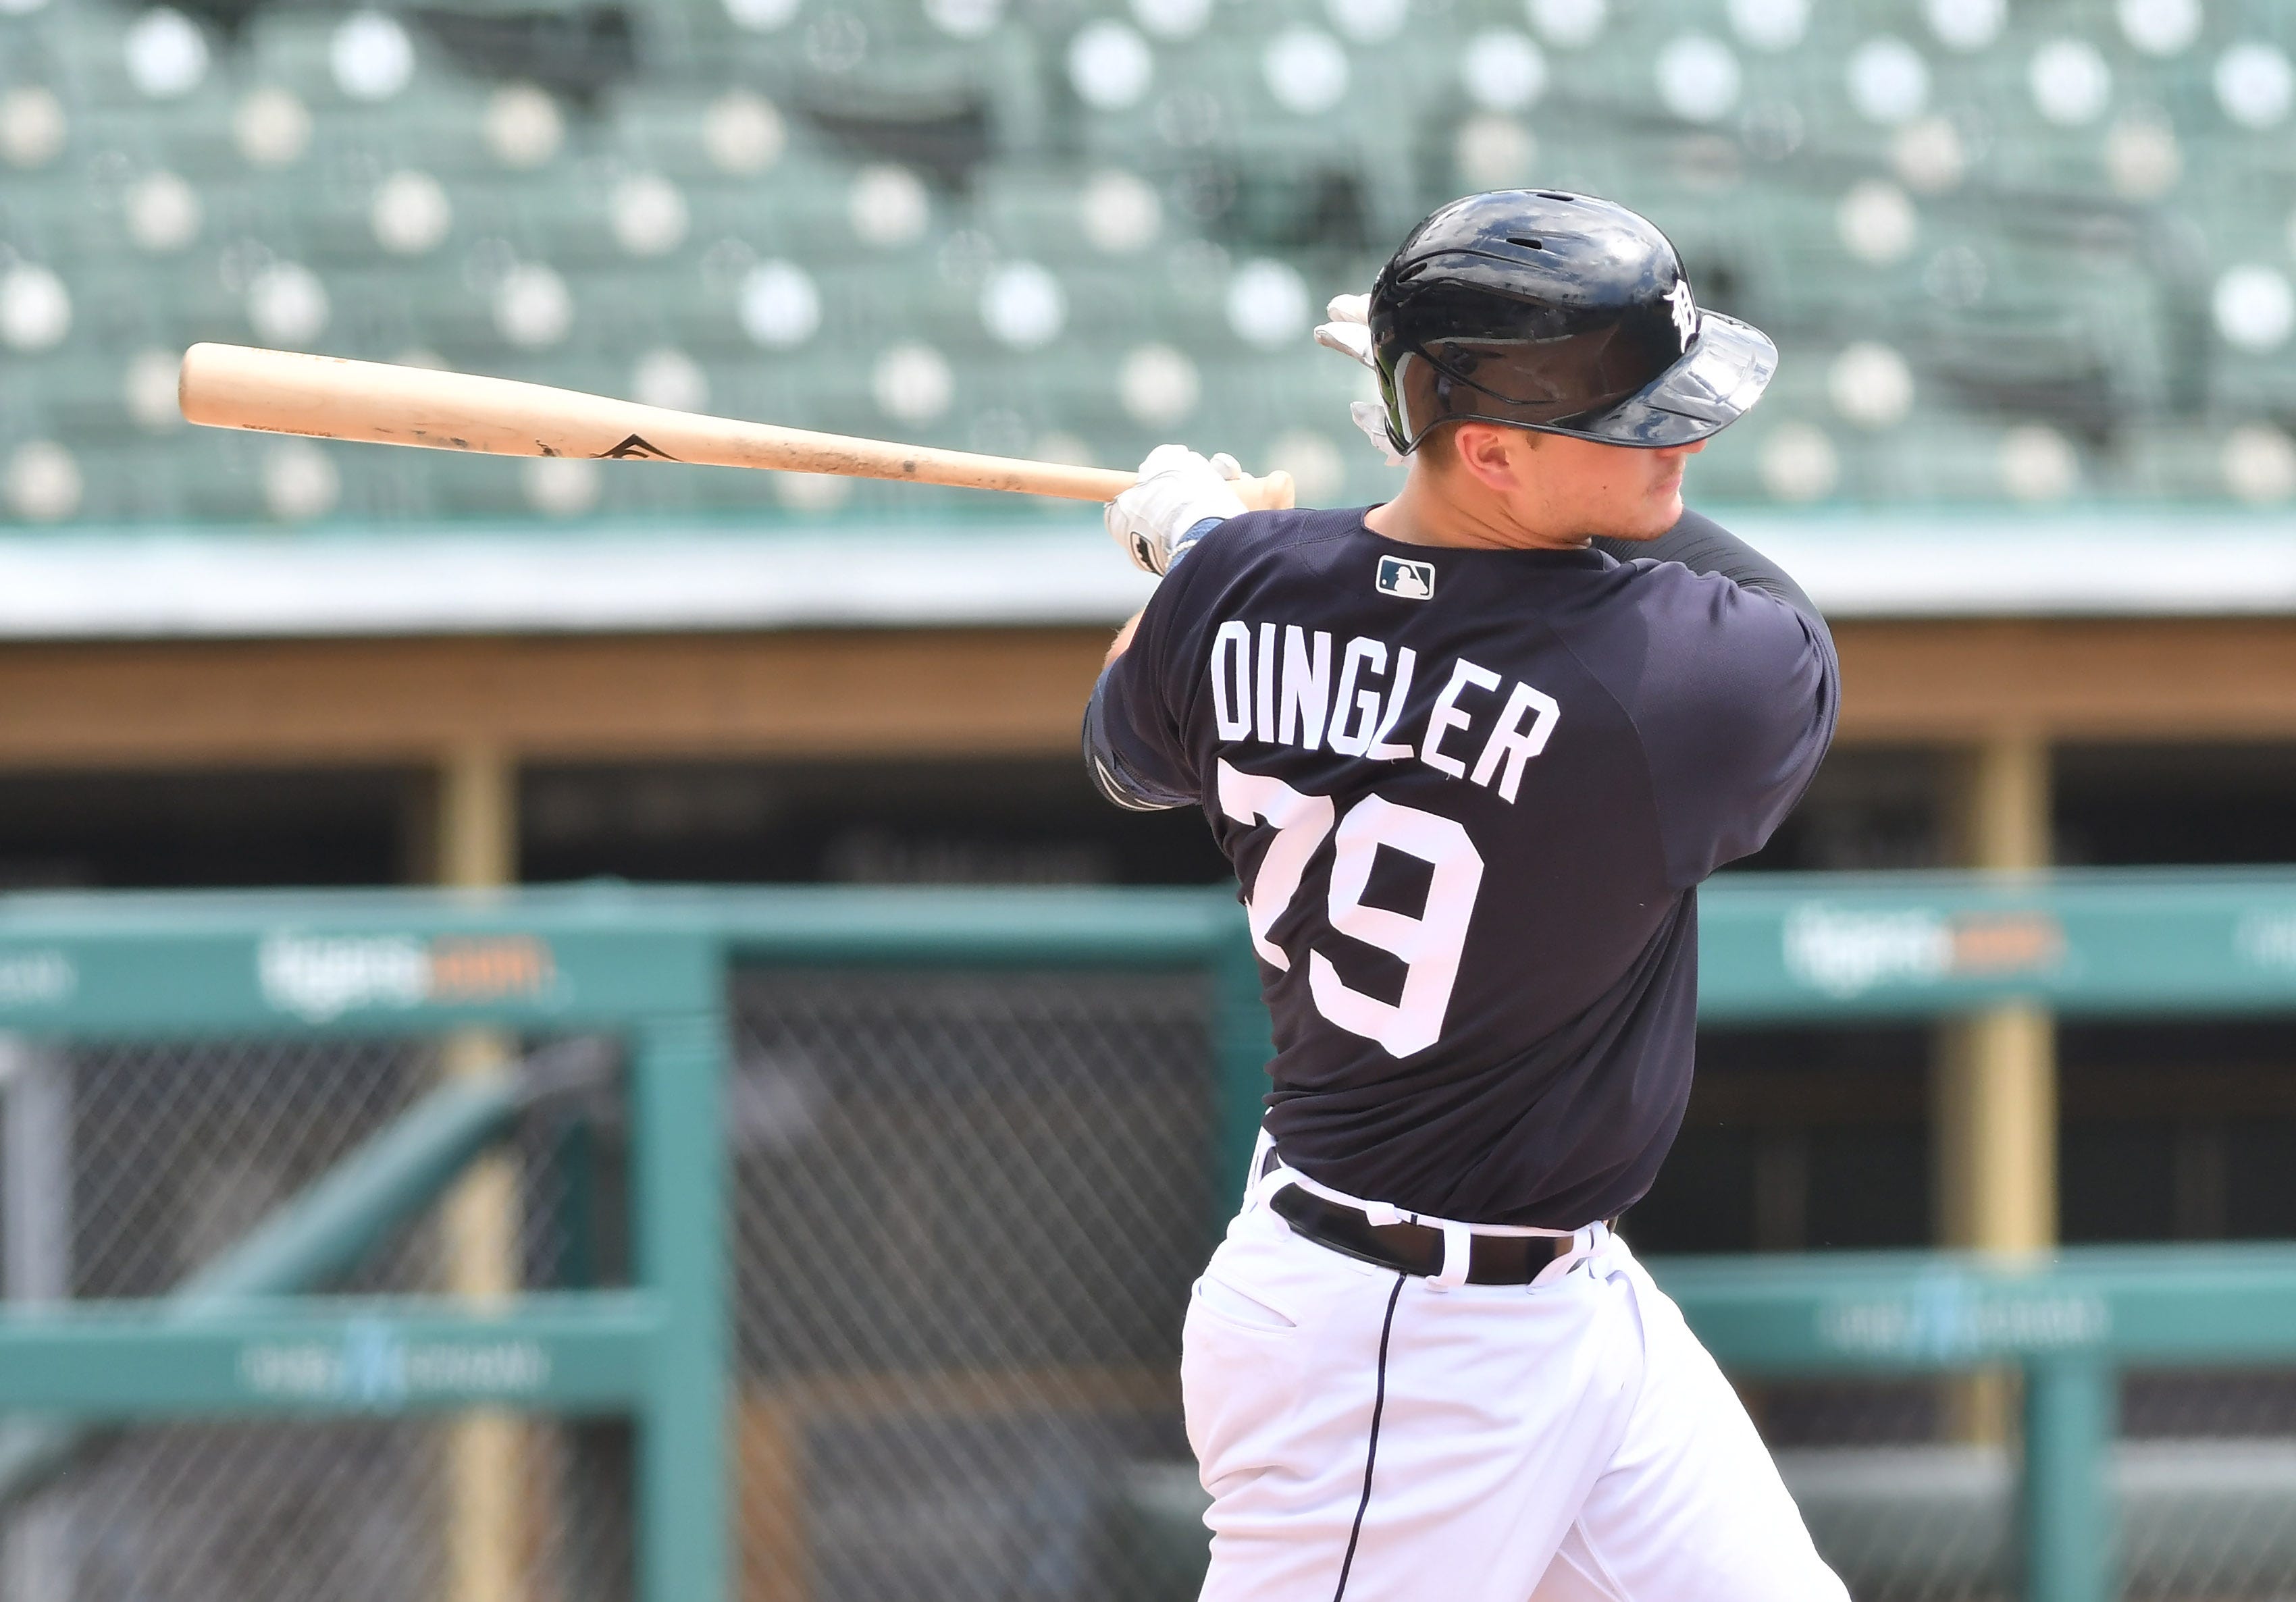 Non-roster invitee Dillon Dingler takes a swing during live batting practice.